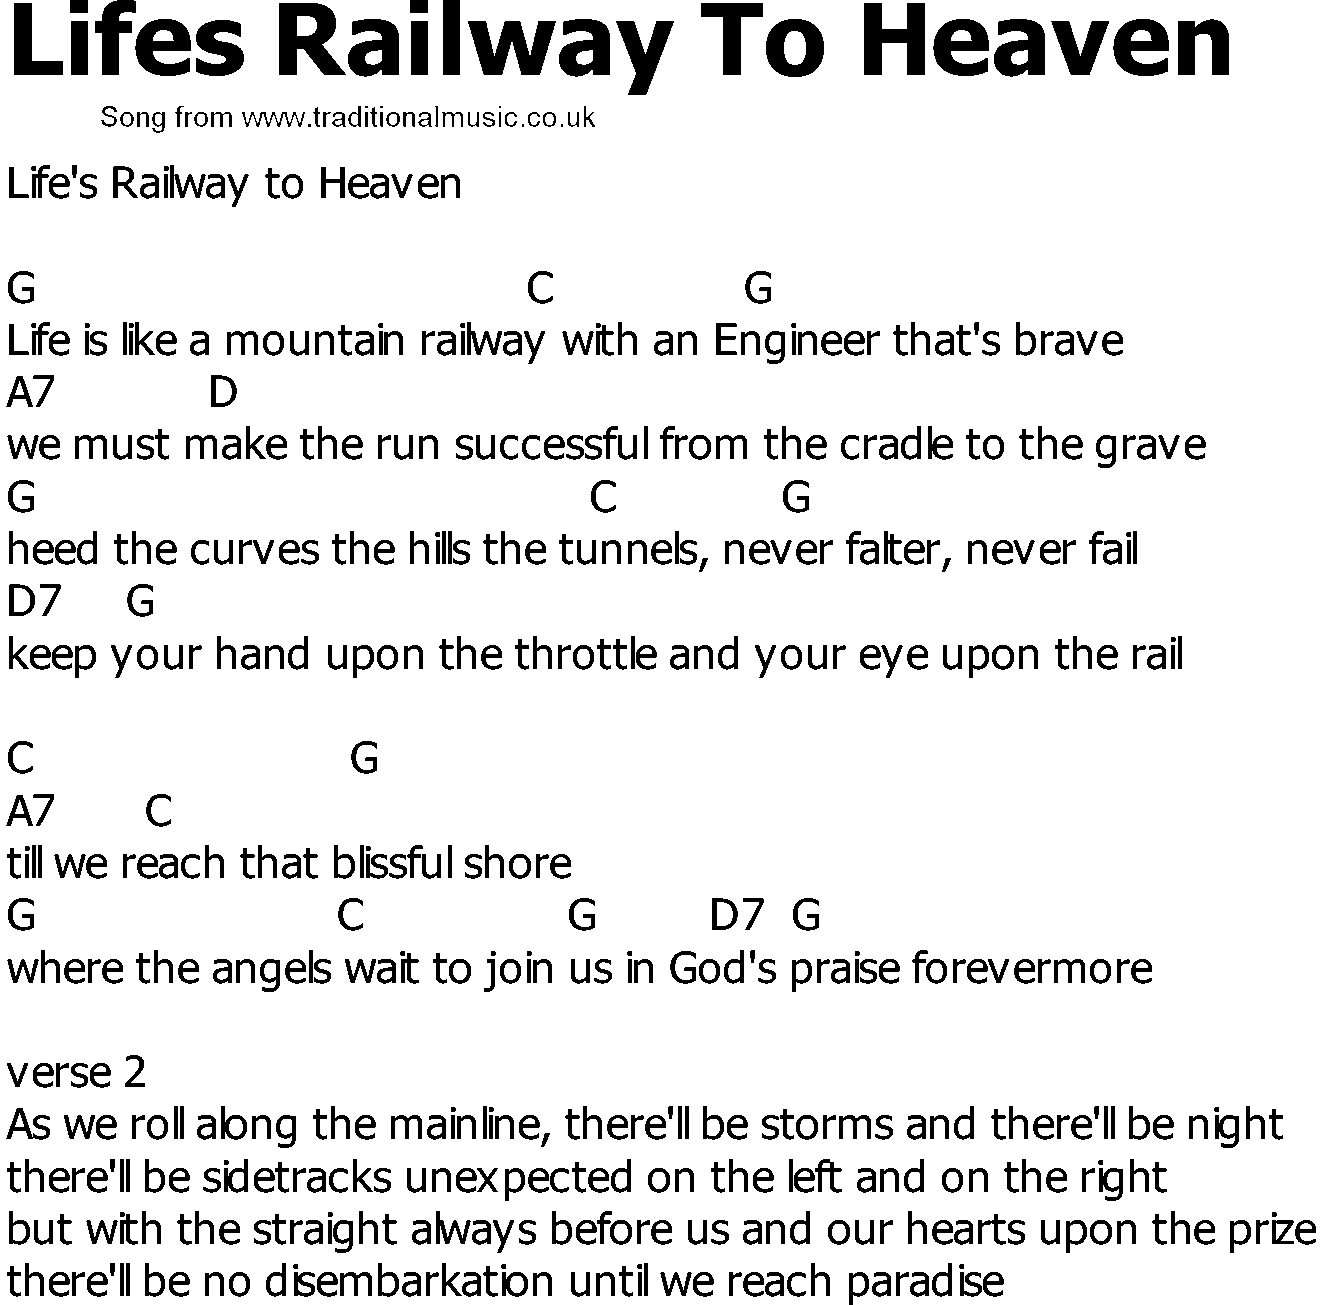 Old Country song lyrics with chords - Lifes Railway To Heaven